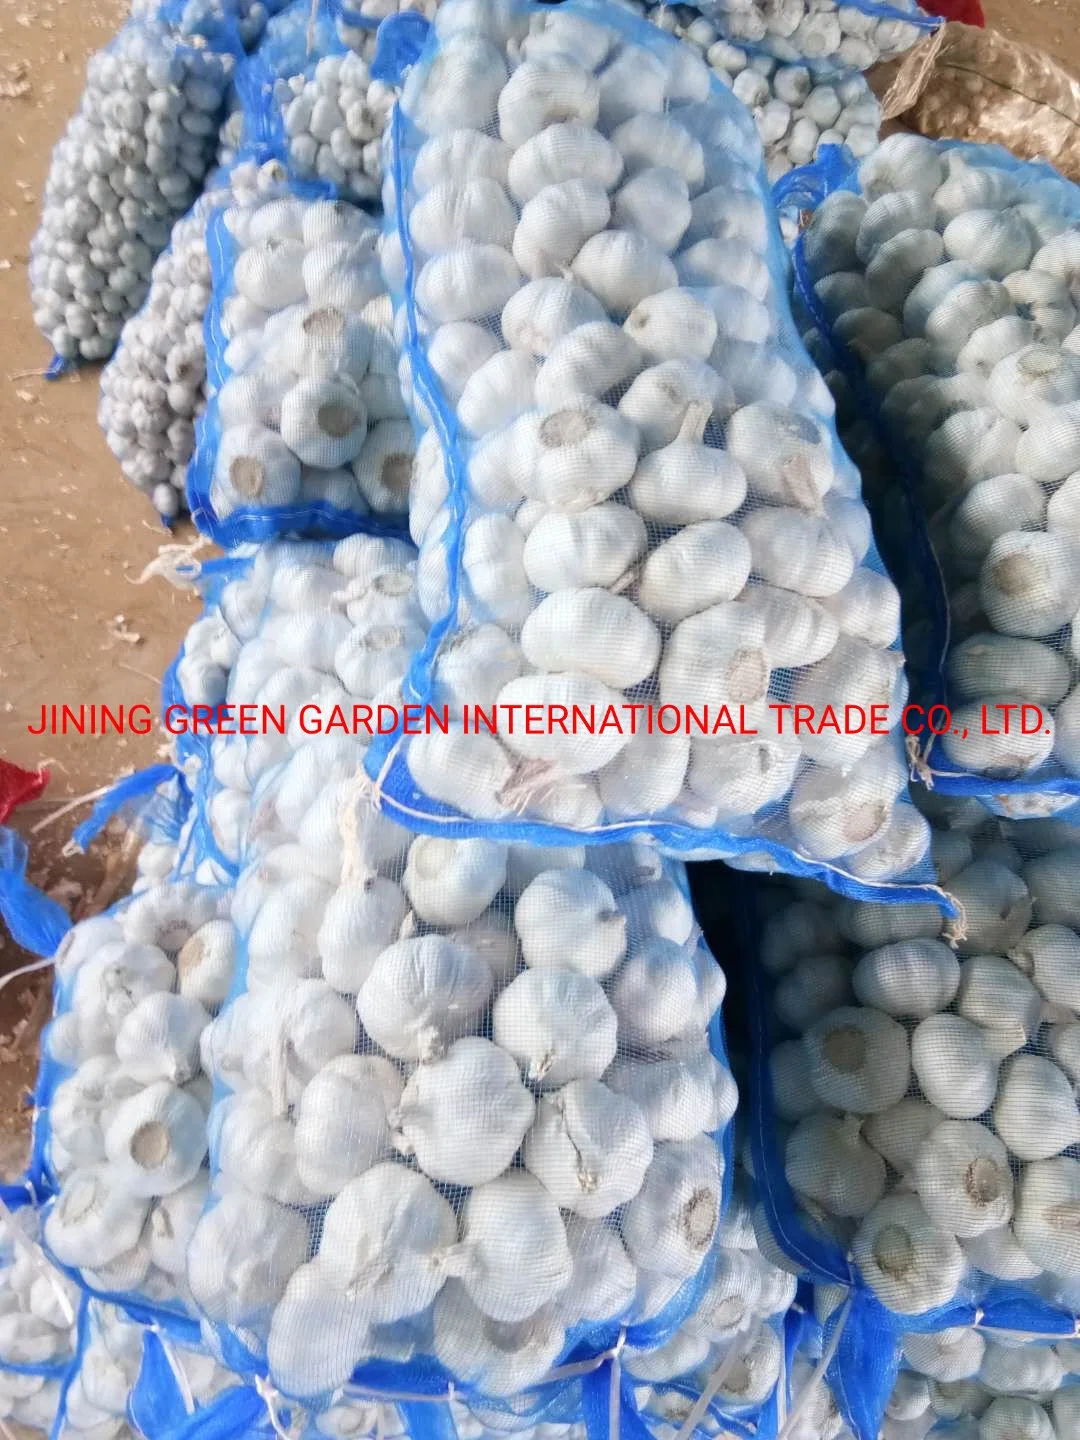 Greengarden 2022 New Crop Chinese Fresh Garlic in Bulk Normal White Purple Garlic From China Manufacturers with Low Prices